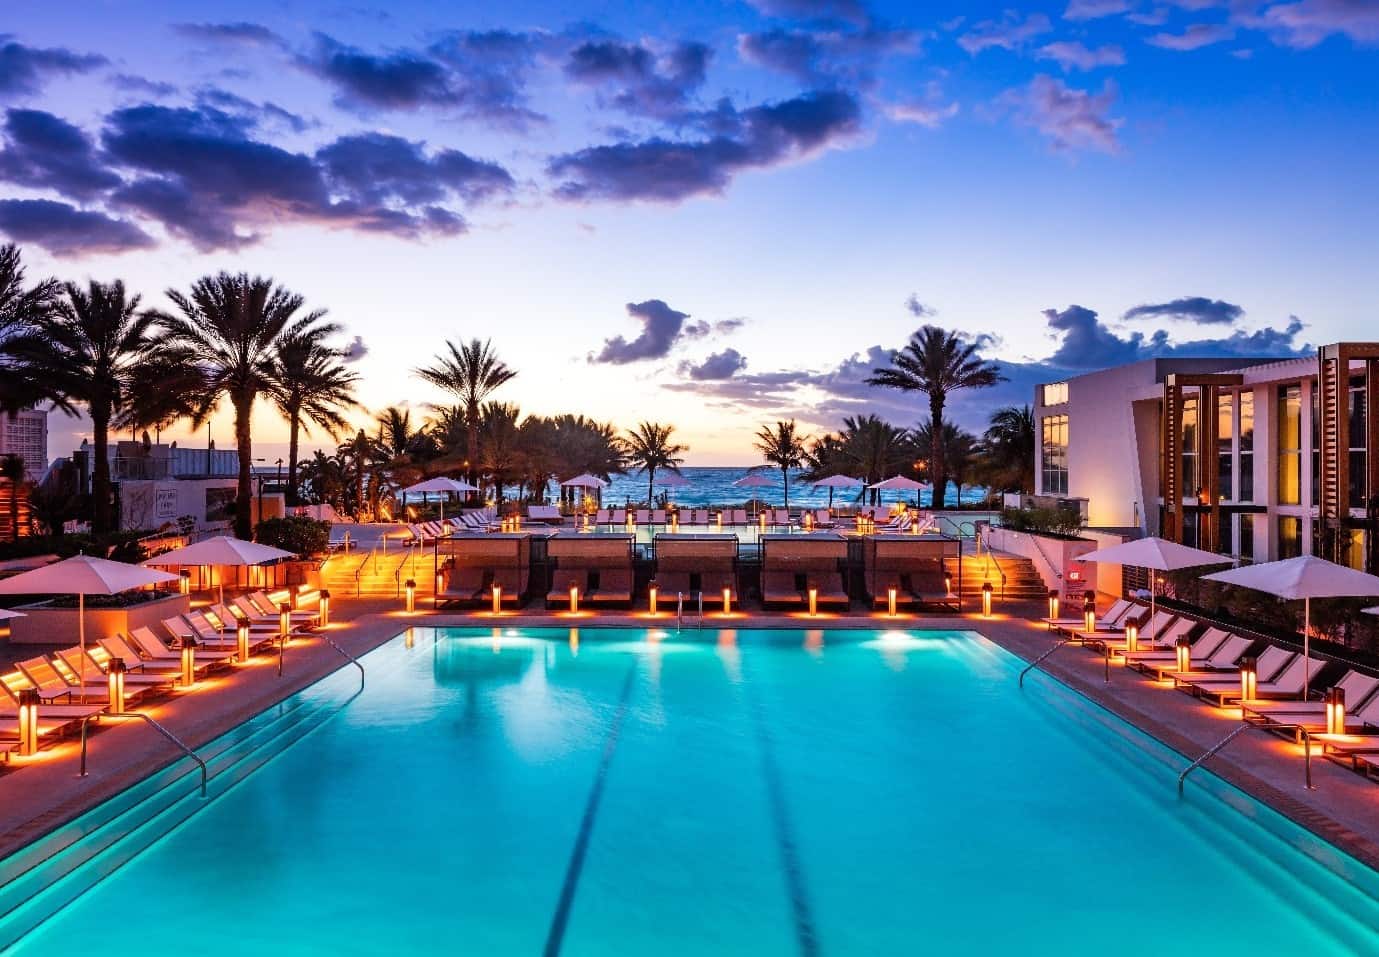 View of the swimming pool in the evening at Eden Roc Miami Beach Resort in Florida